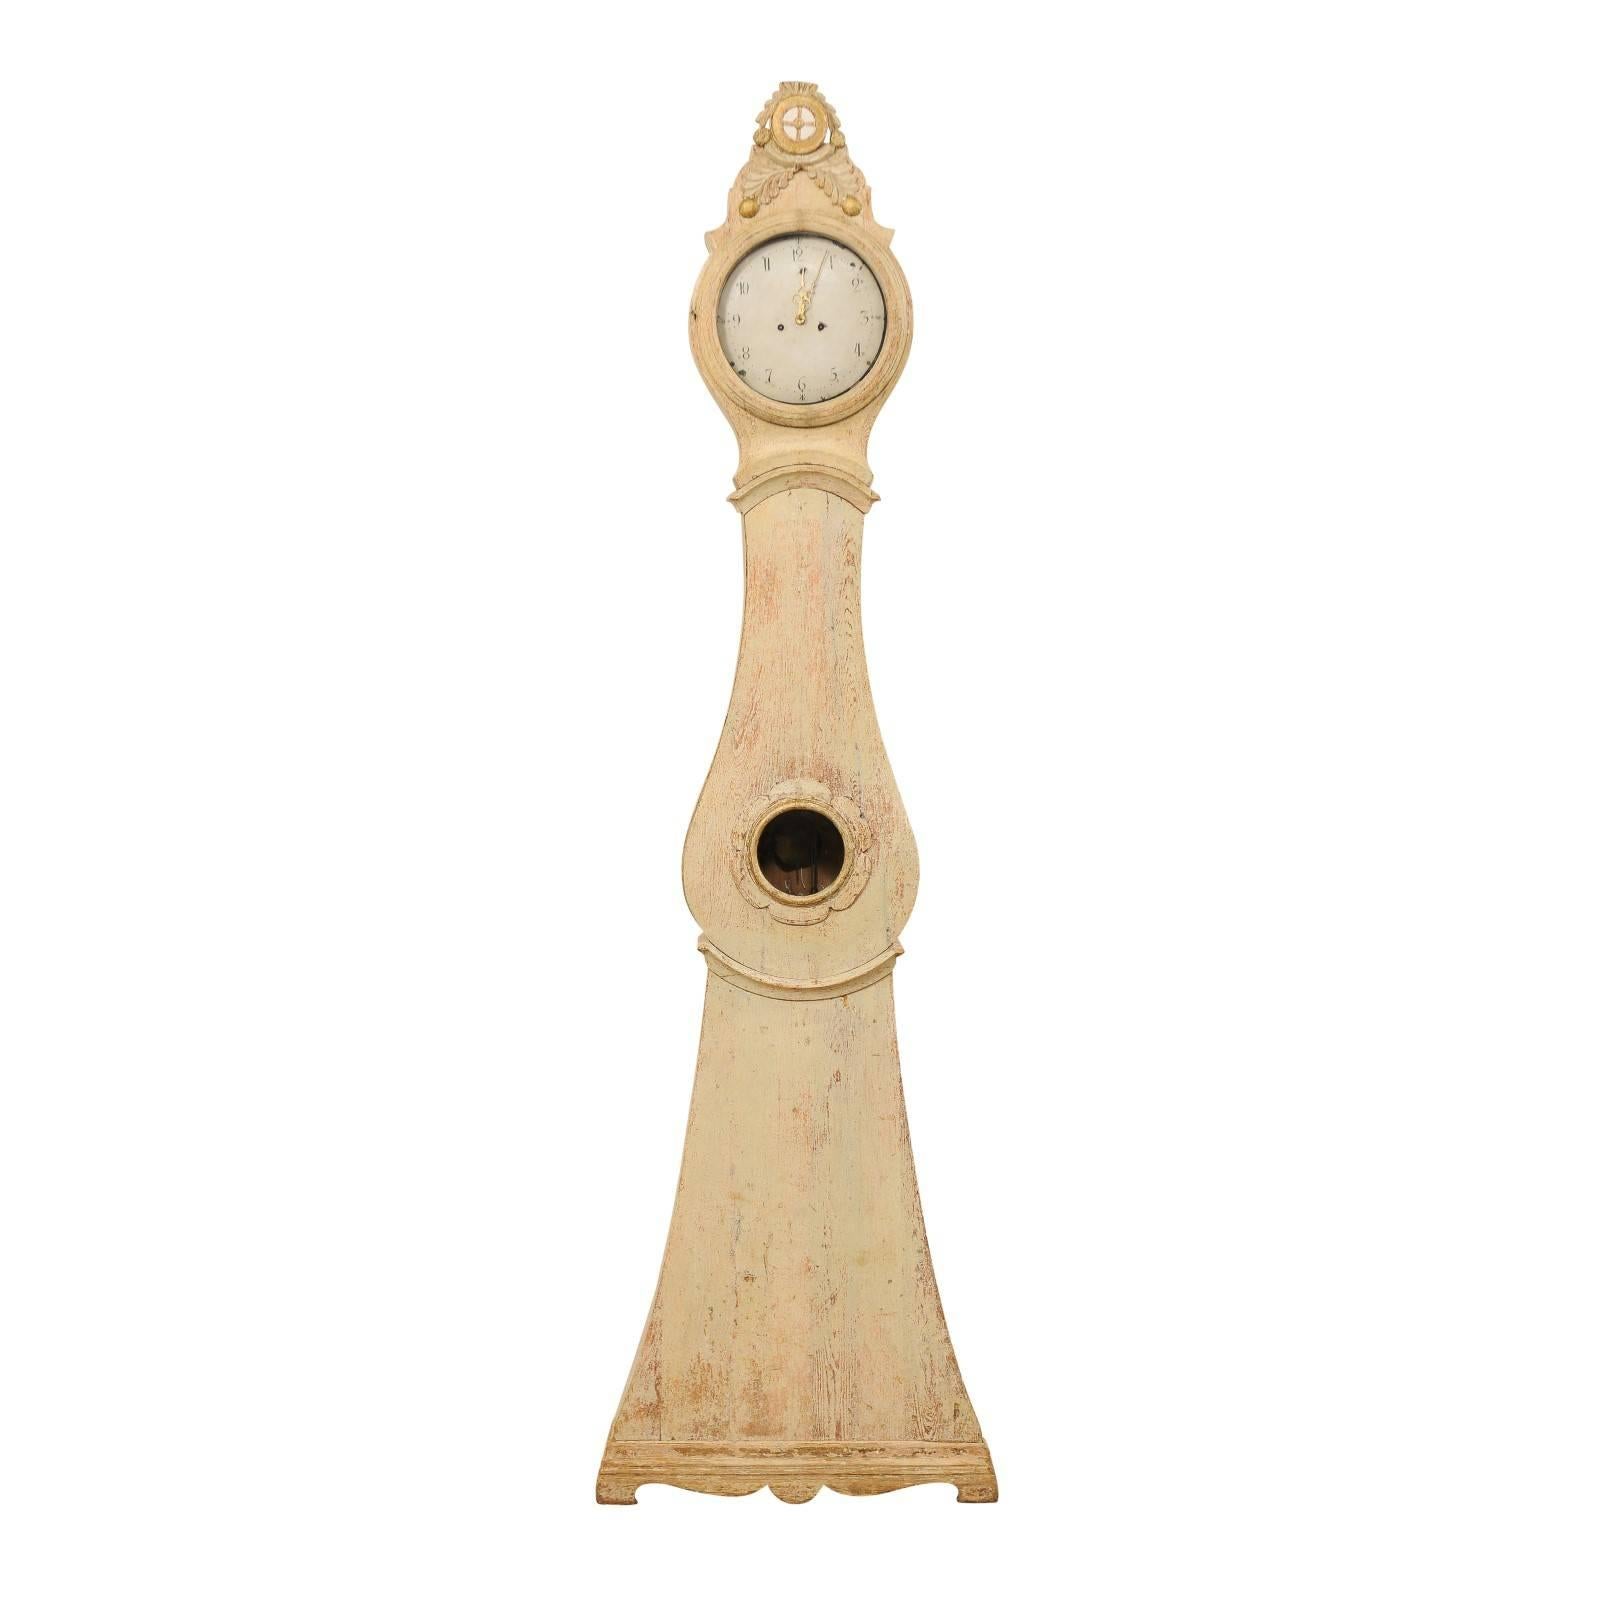 A 19th C. Floor Clock with Beautifully Exaggerated Crest from Norrbotten, Sweden